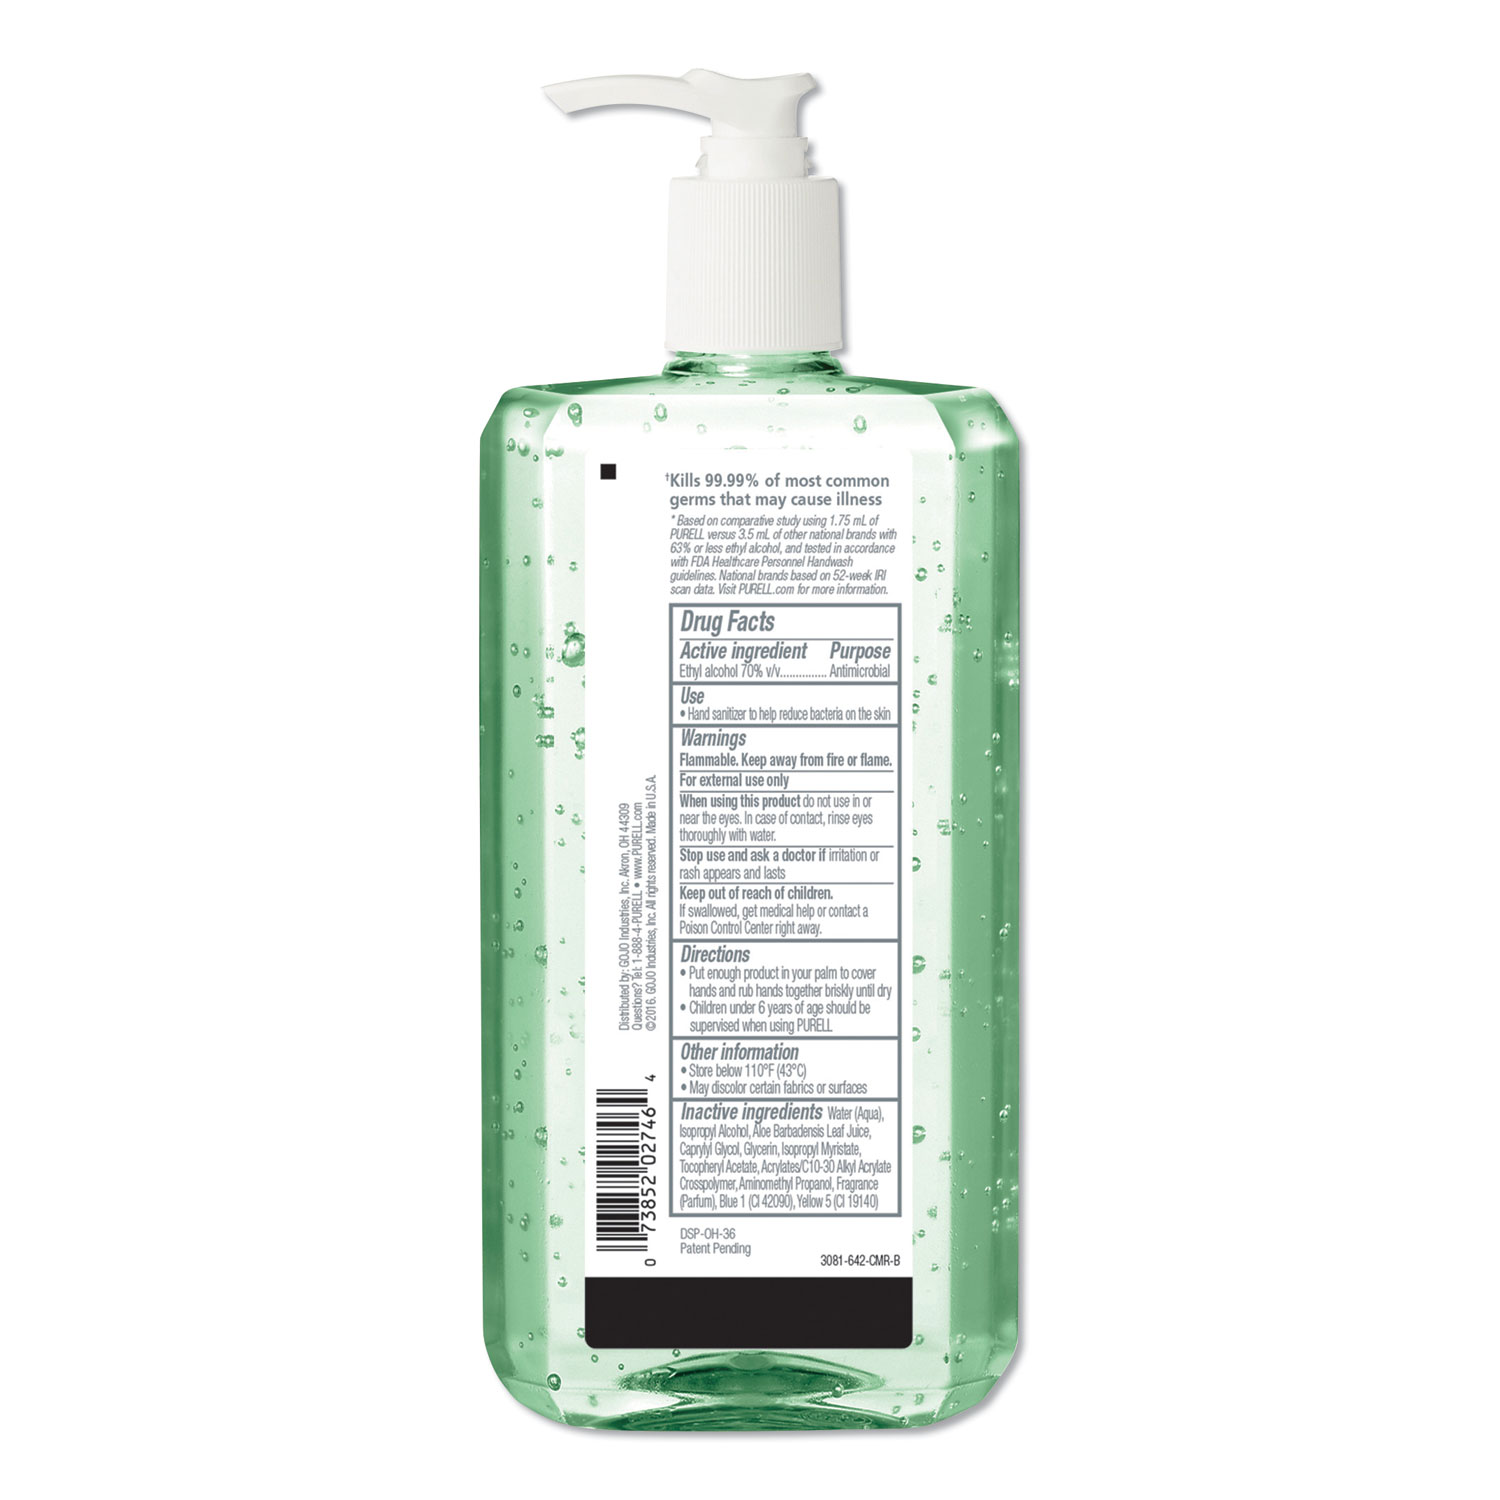 Advanced Hand Sanitizer Soothing Gel, Fresh Scent with Aloe and Vitamin E, 1 L Pump Bottle